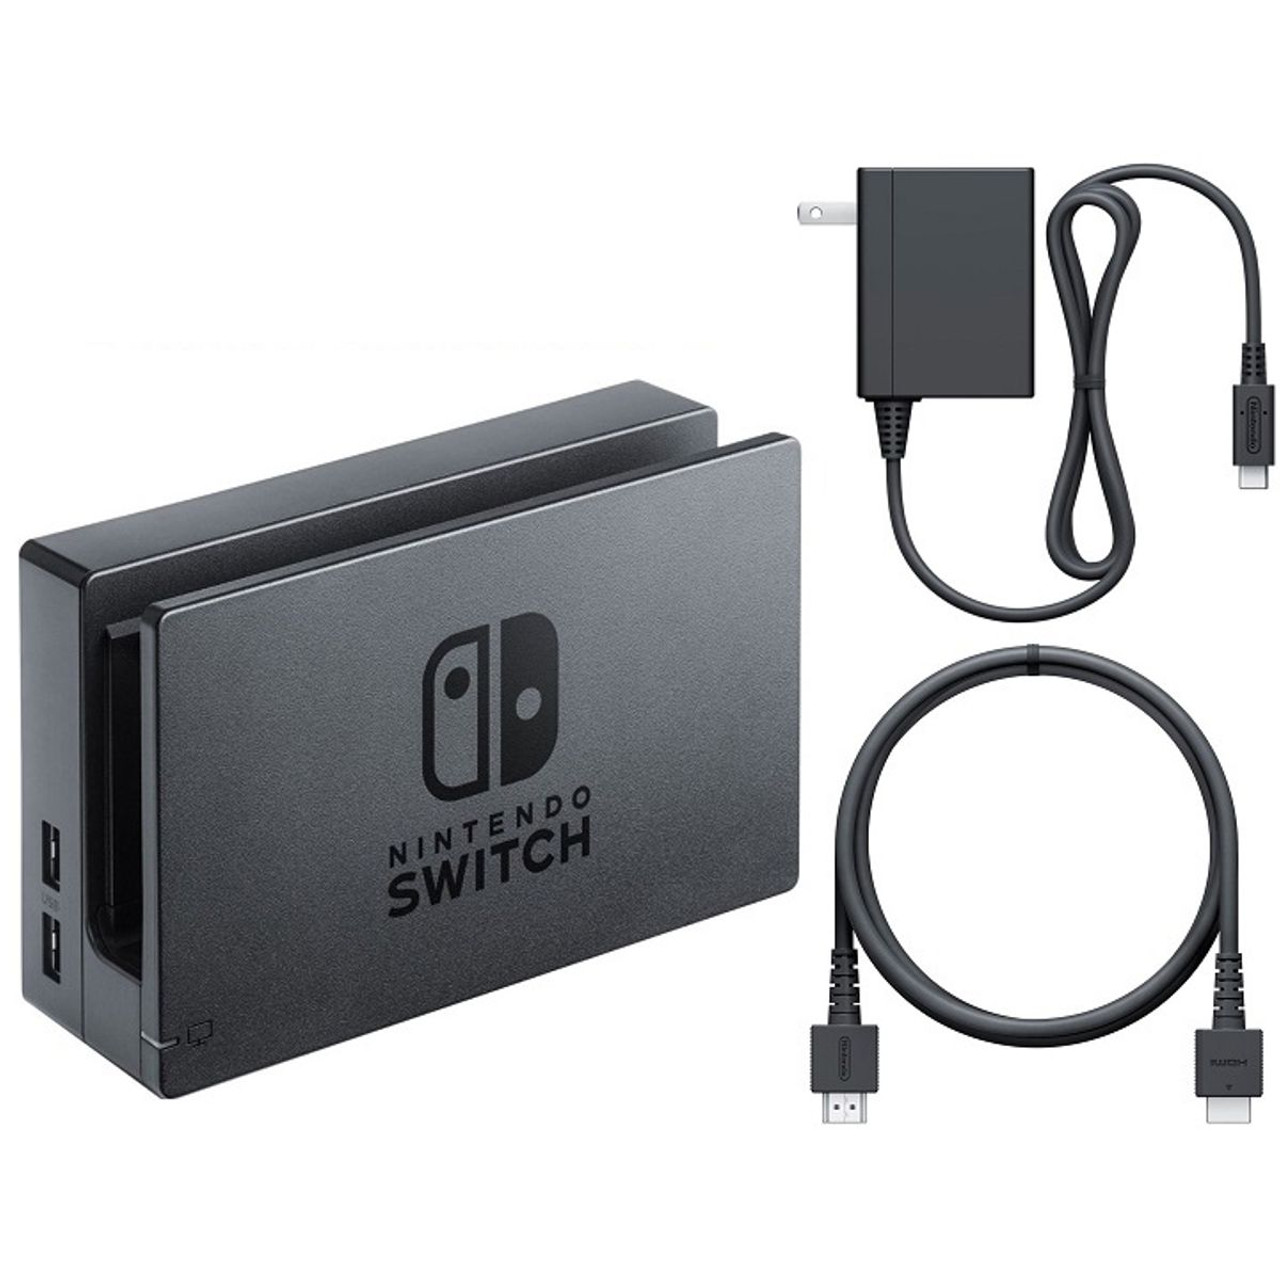 Dock Set with HDMI & Power Cable for Nintendo Switch product image